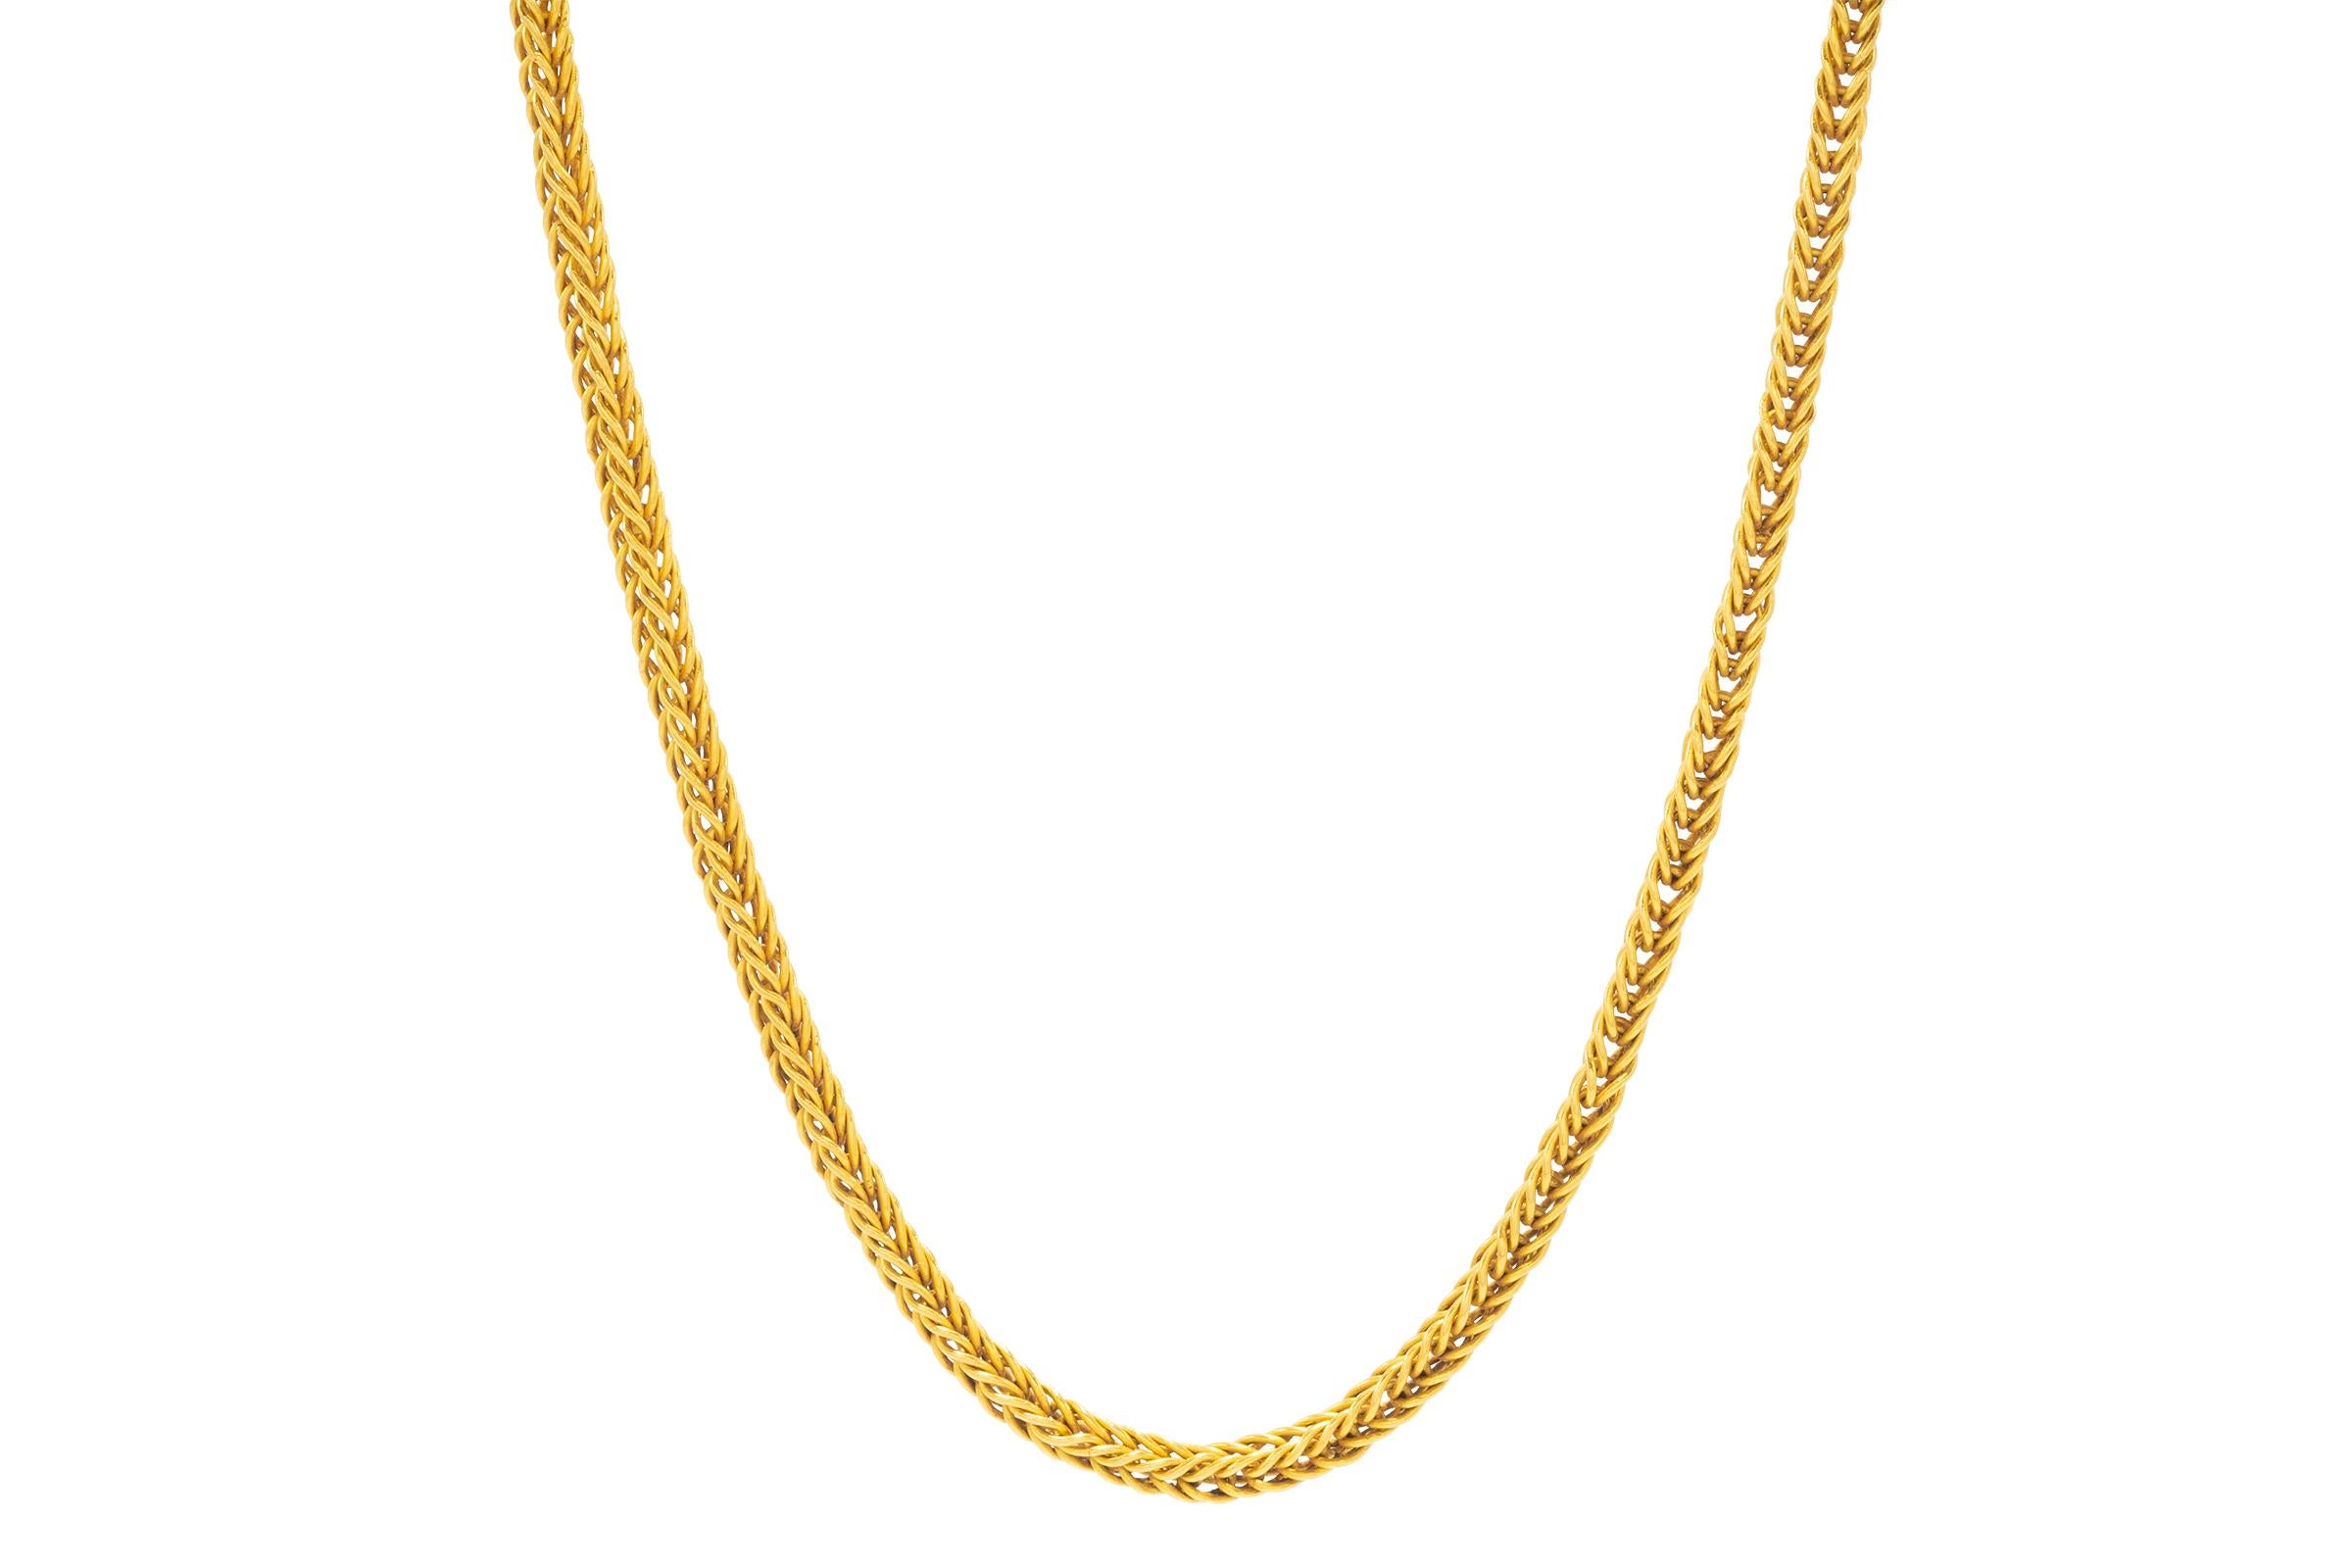 Using the ancient art of gold smithing, this intricately woven chain is handmade using pure 22k gold. Each jump ring is hand shaped and fused, then woven together and completed with a unique handmade S hook clasp. A classic look, rich feel and every